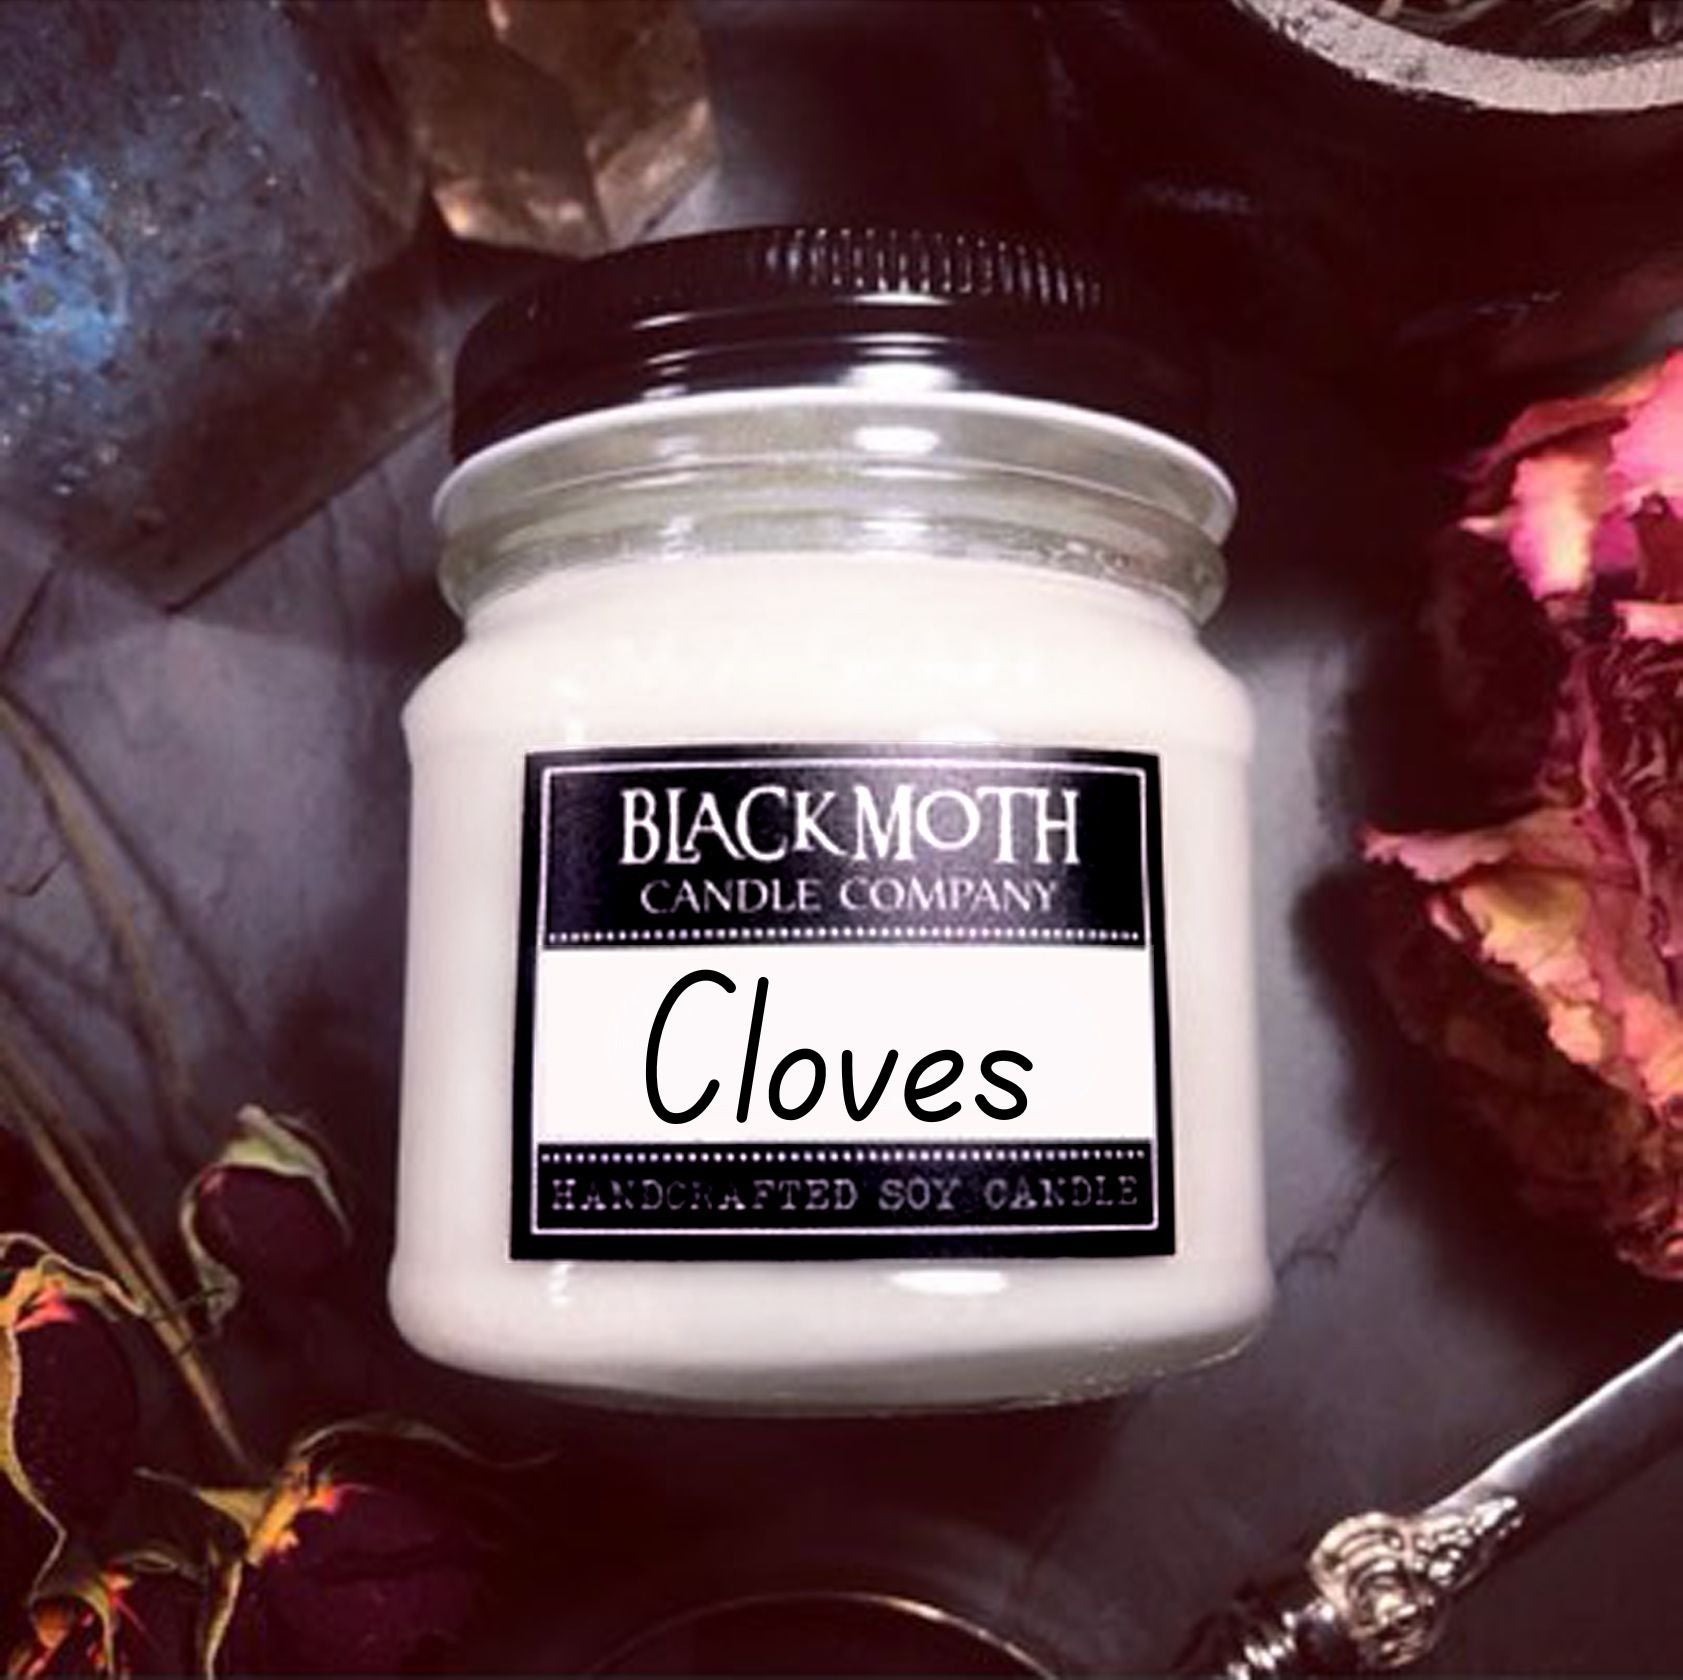 8 oz Cloves Scented Soy Candle in Mason Jar